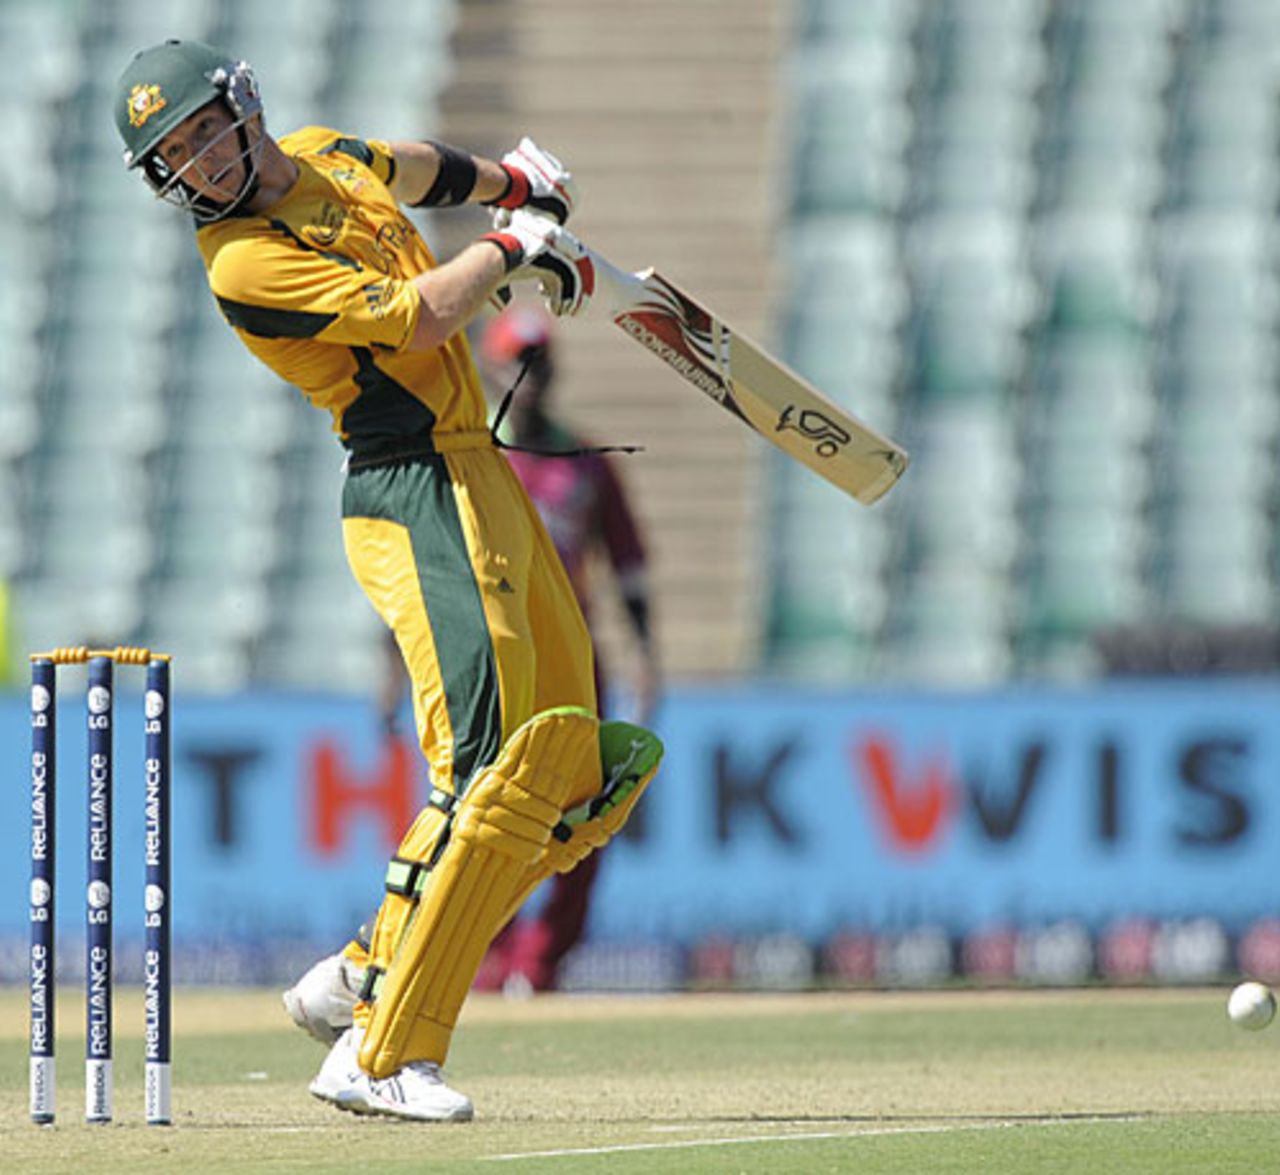 Tim Paine tries to avoid a rising ball, Australia v West Indies, ICC Champions Trophy, Group A, Johannesburg, September 26, 2009